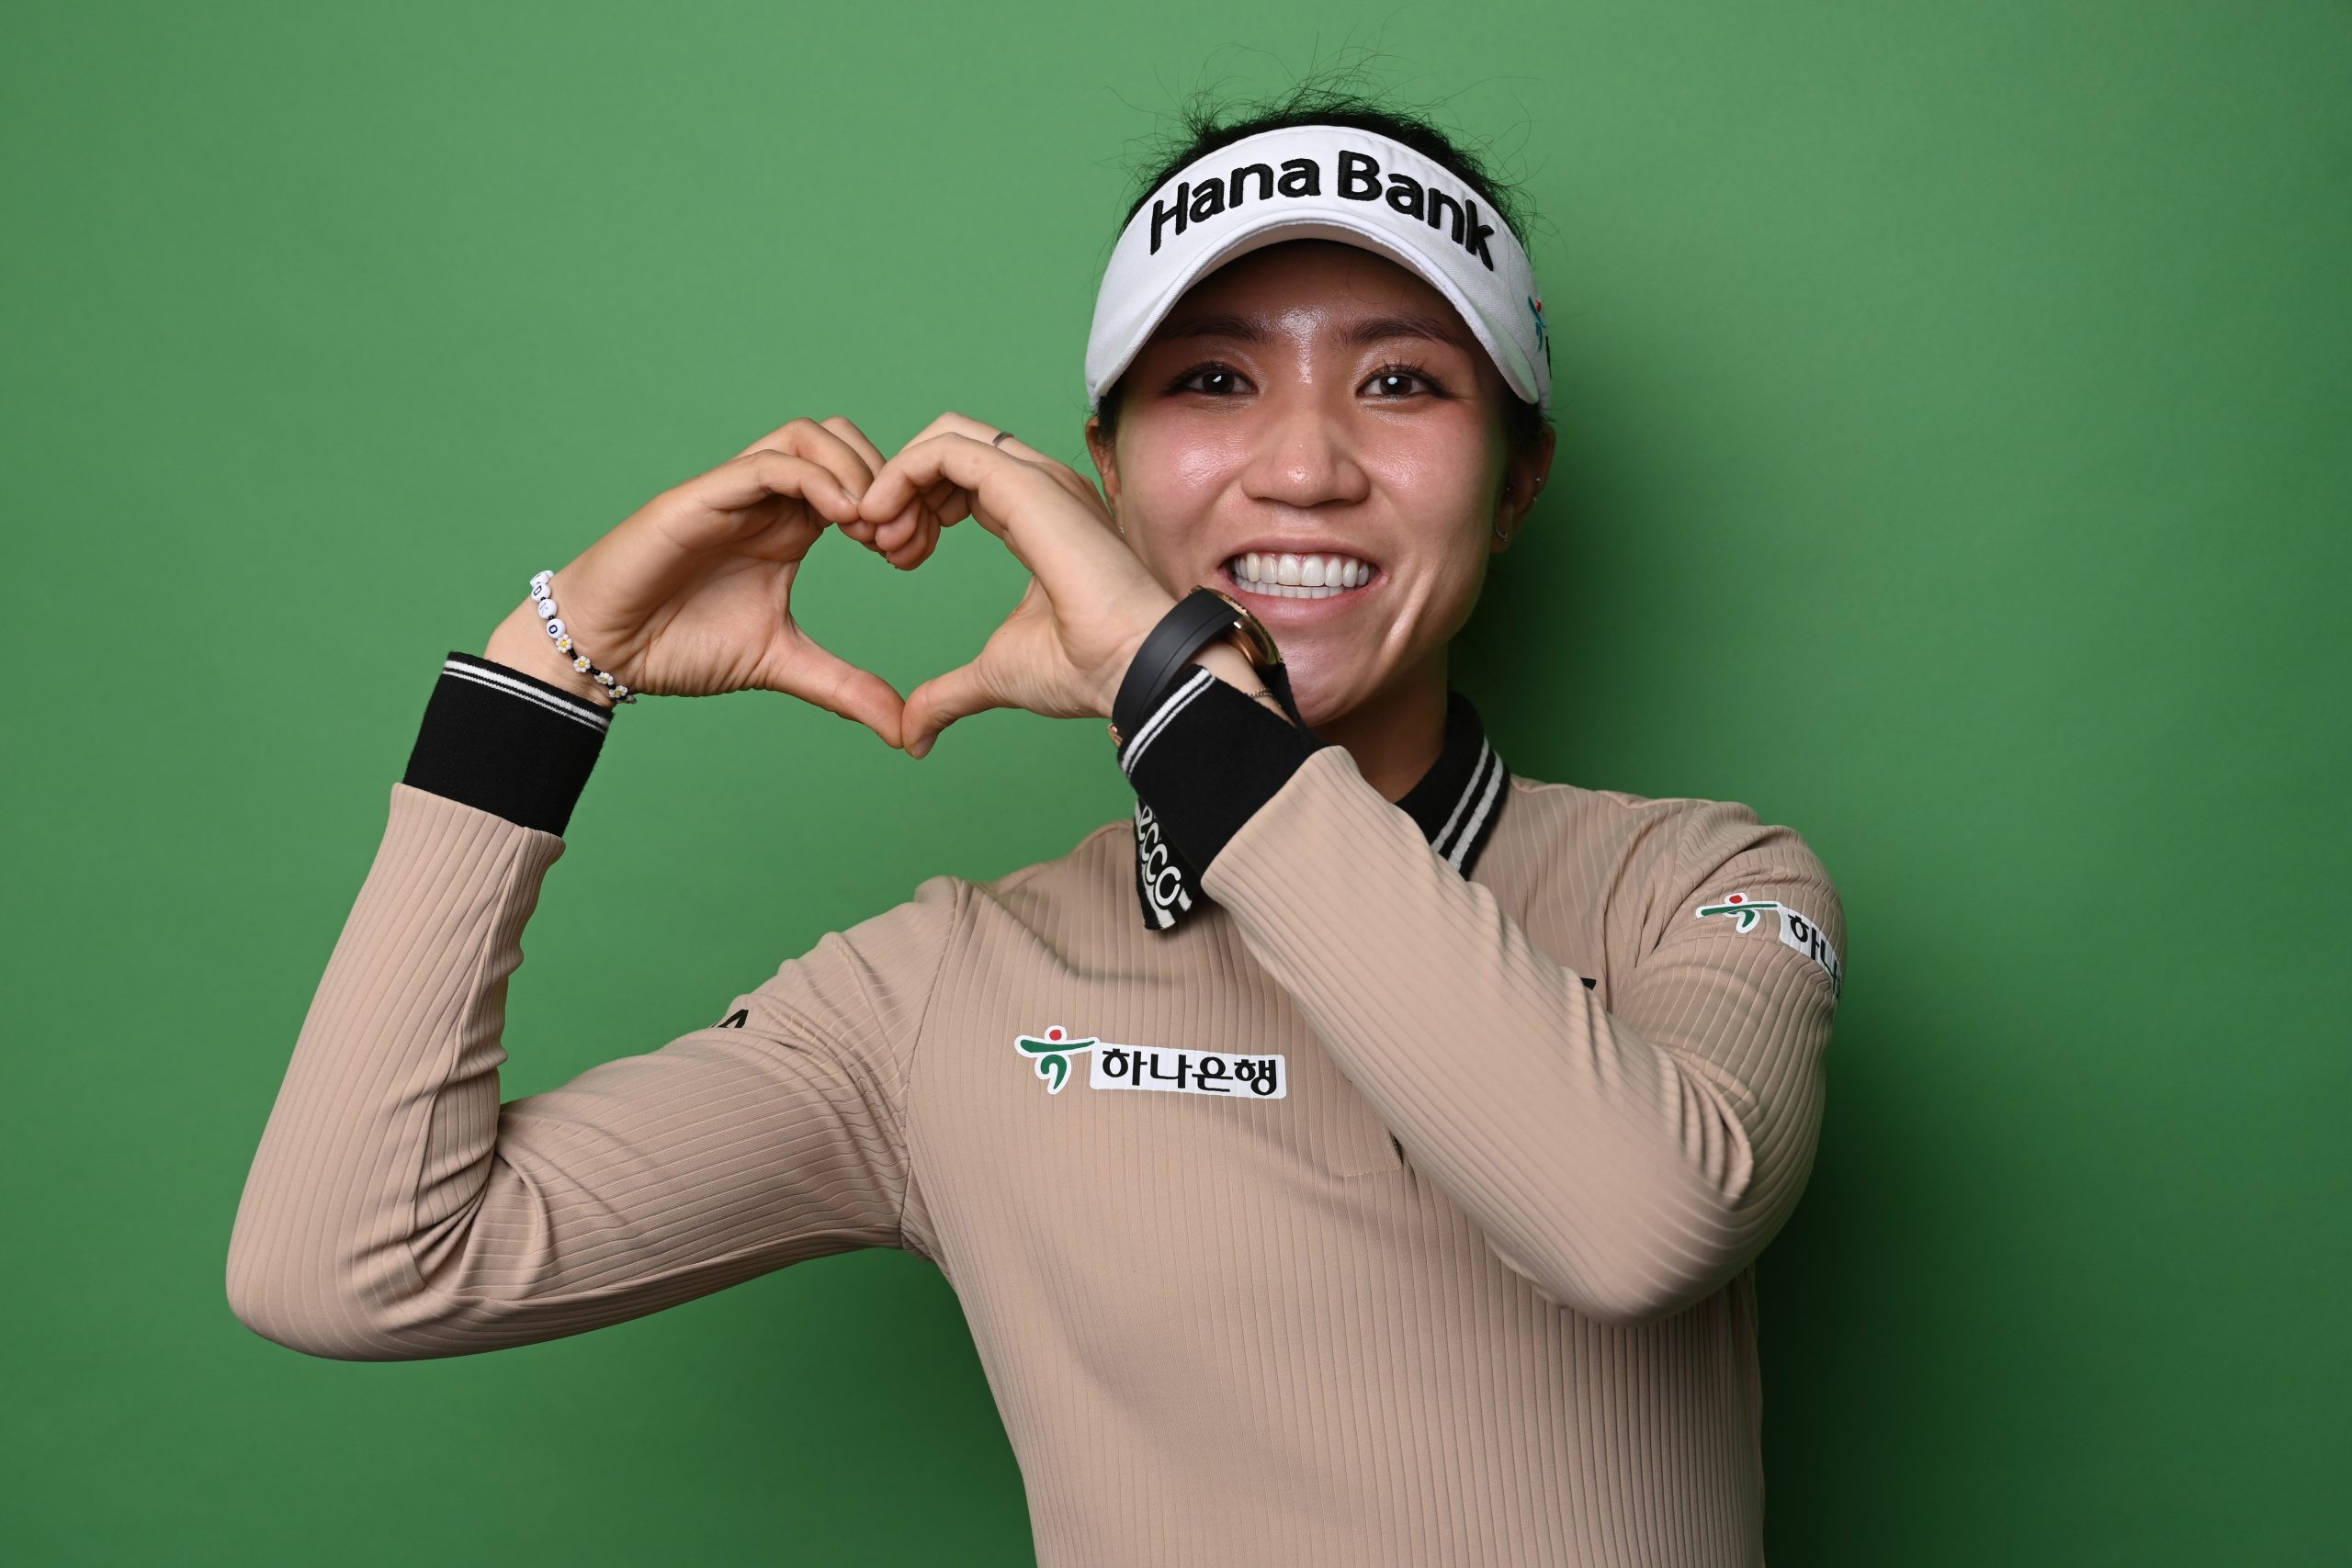 LPGA: 5 things to look for in Thailand, where Lydia Ko, Nelly Korda and Jin Young Ko are primed for battle along with Japanese teen sensation Saki Baba